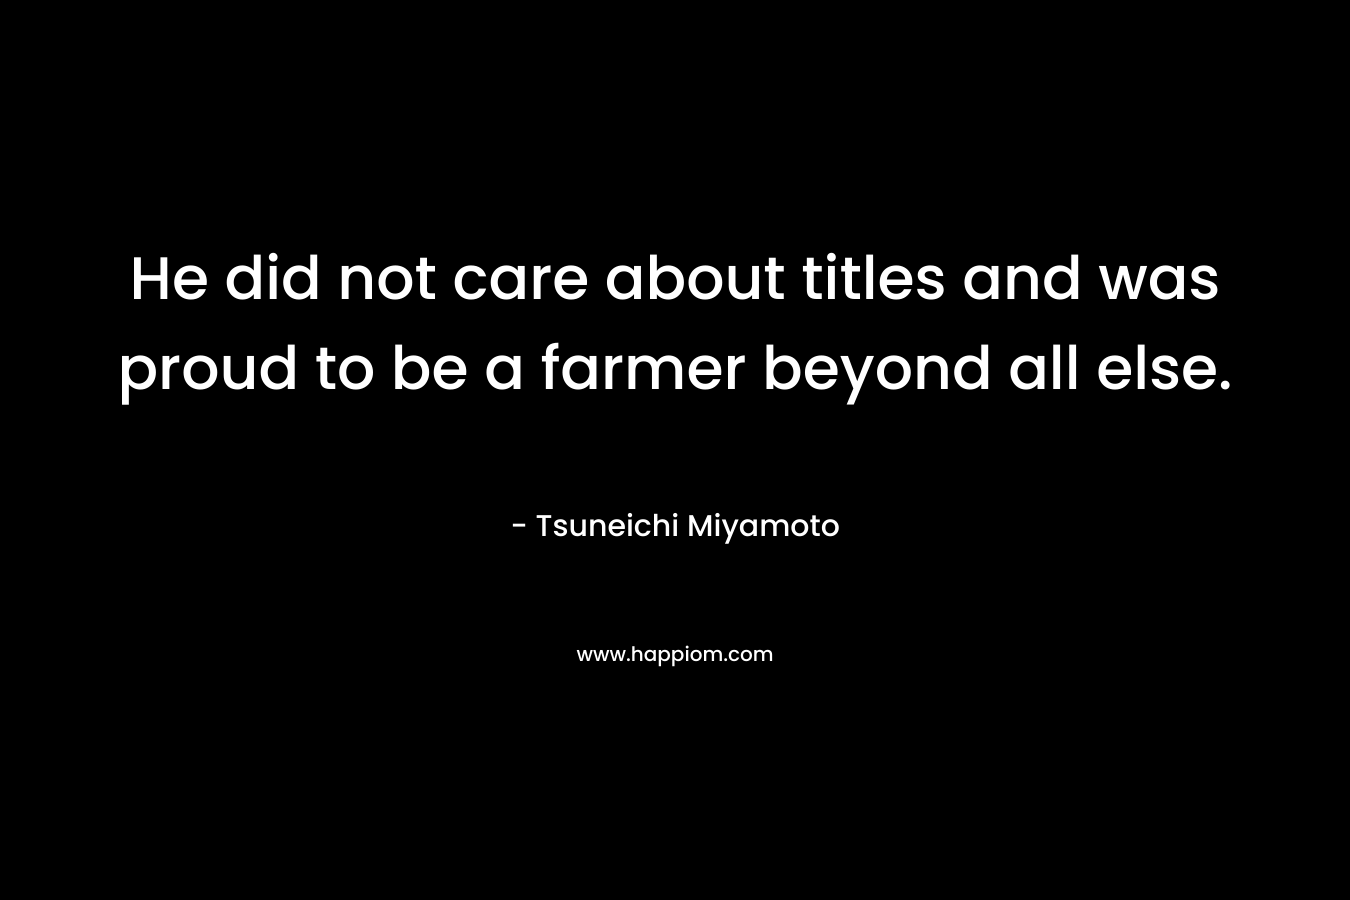 He did not care about titles and was proud to be a farmer beyond all else. – Tsuneichi Miyamoto